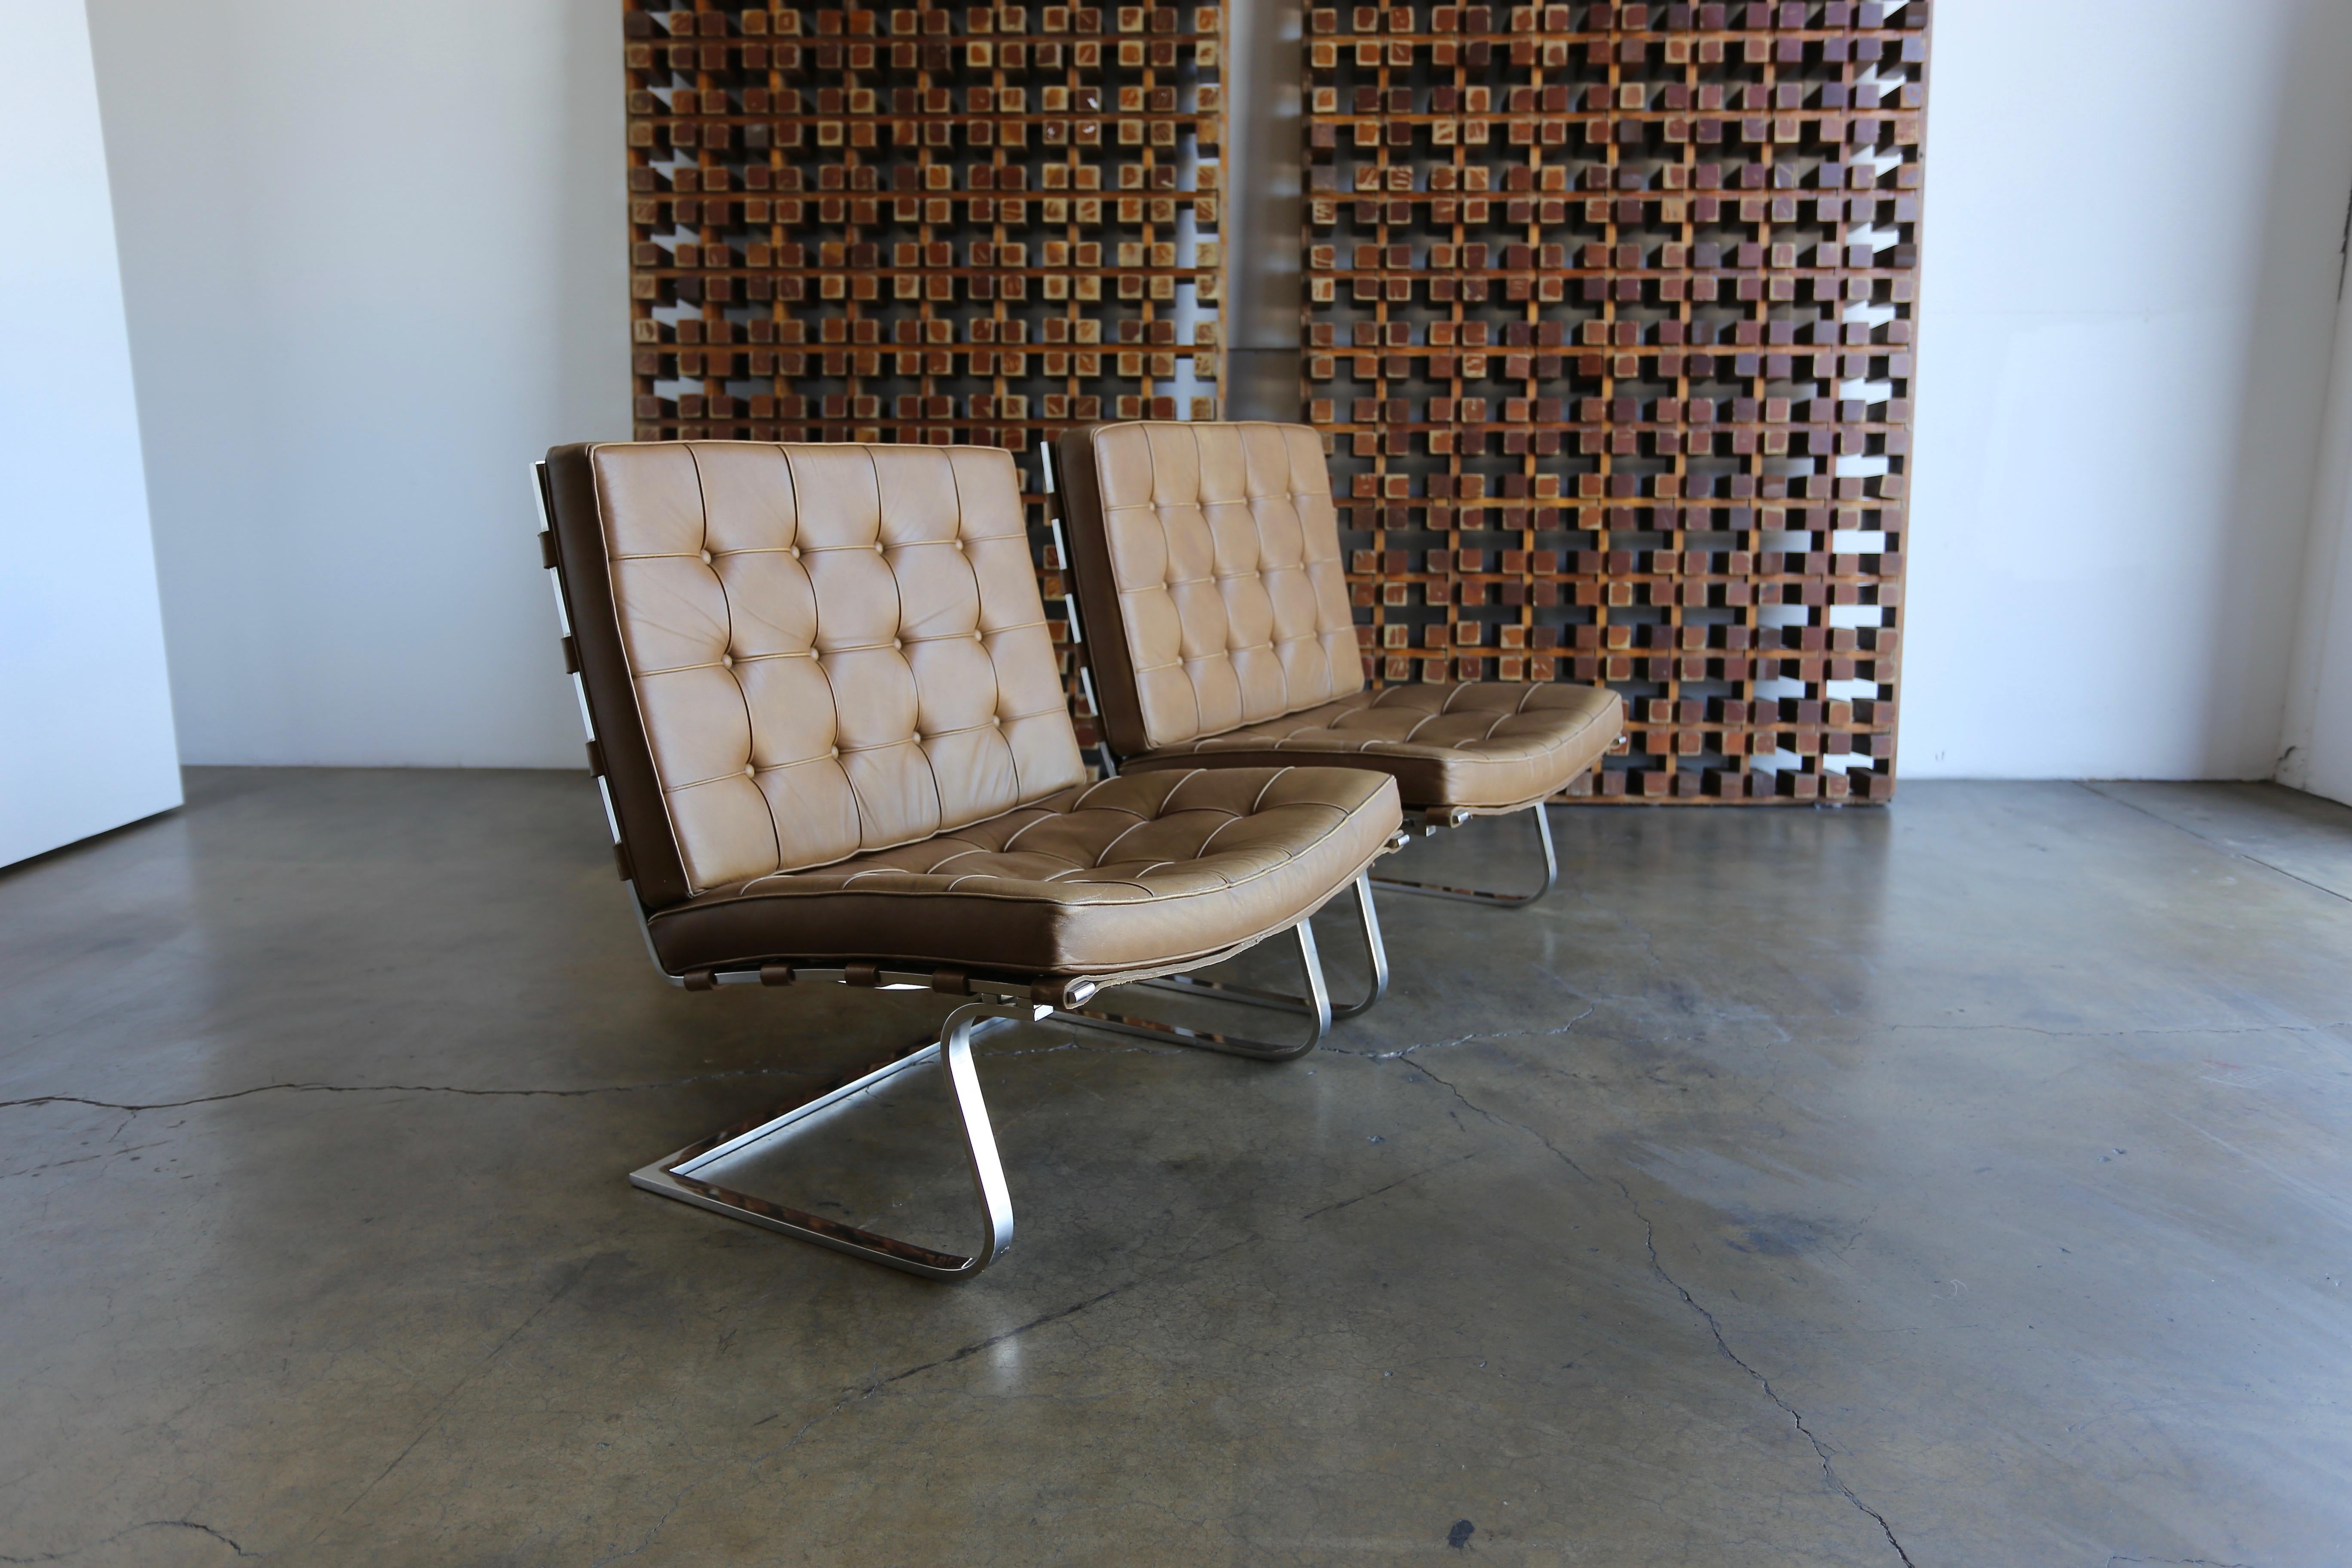 Pair of Mies van der Rohe MR 70 Tugendhat chairs. Manufactured by Knoll, circa 1970. Beautiful original patina to the leather.